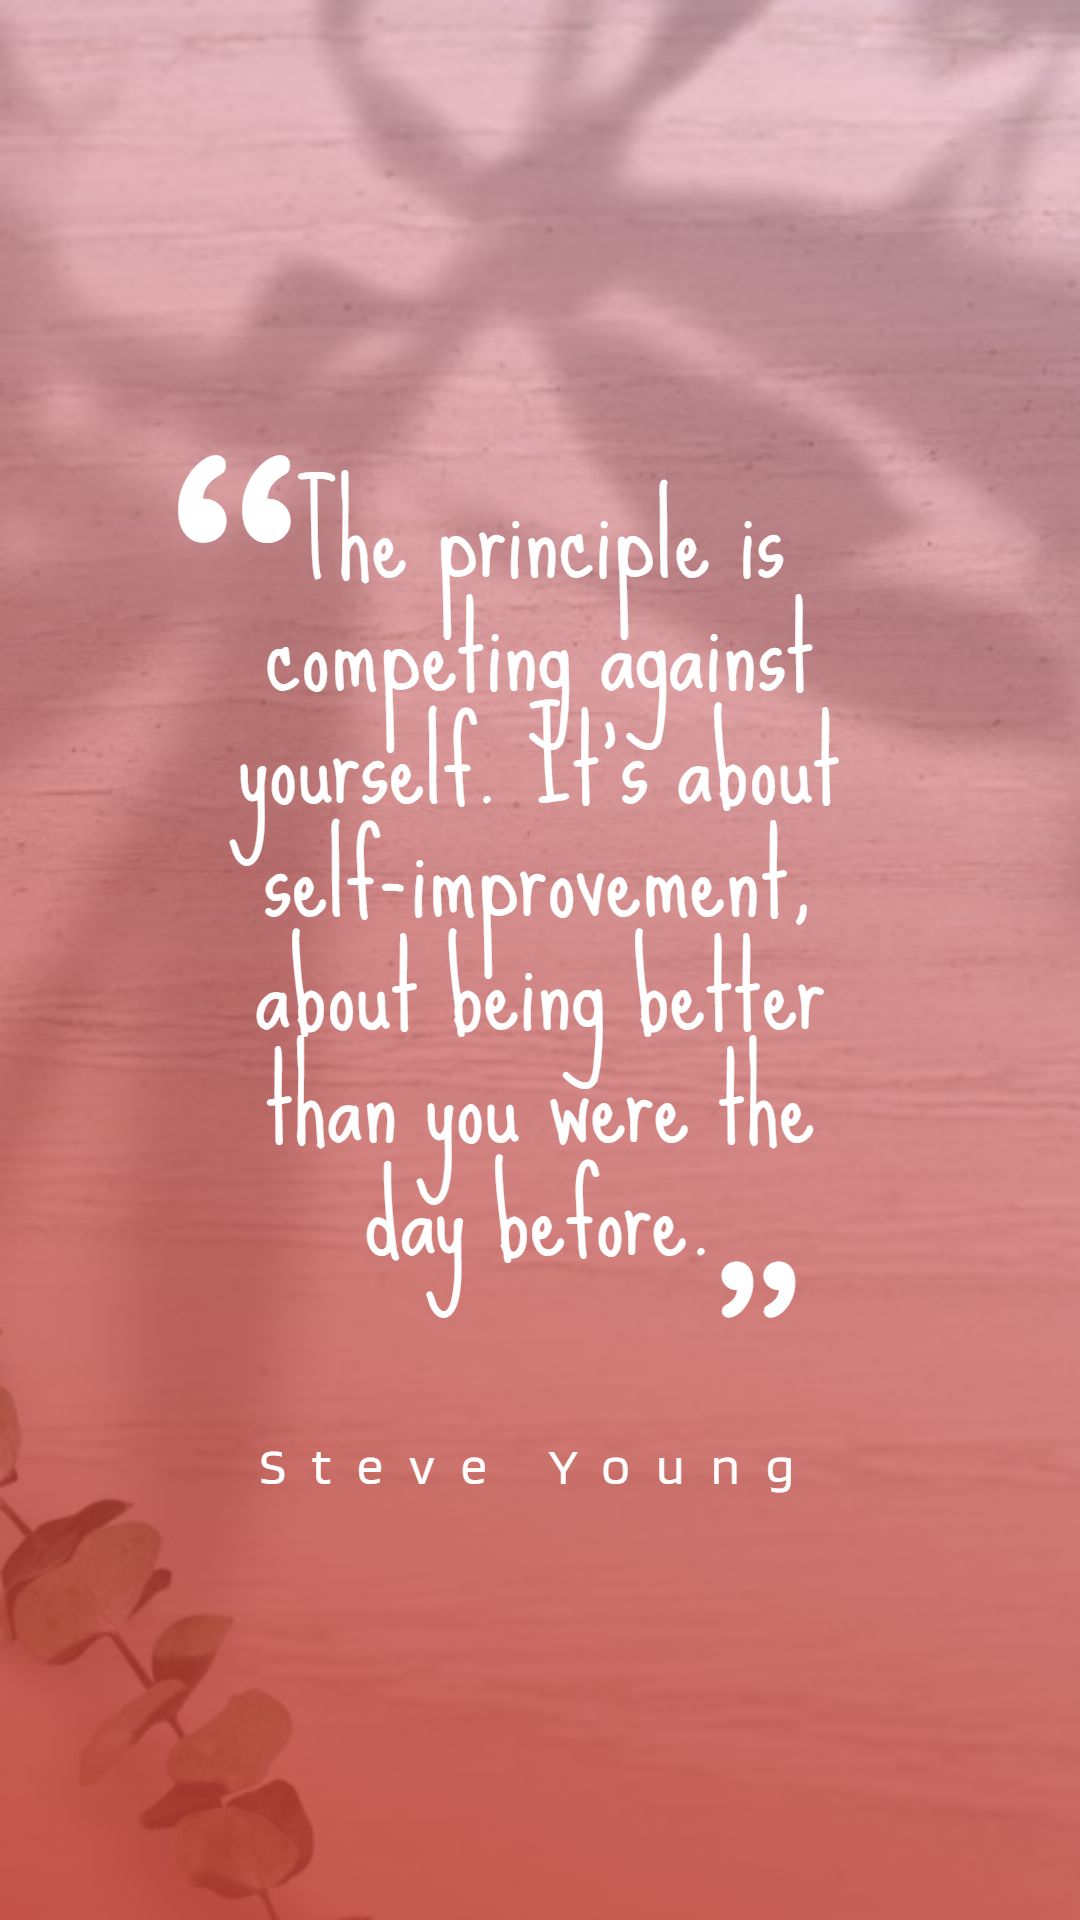 The principle is competing against yourself. It’s about self improvement about being better than you were the day before.